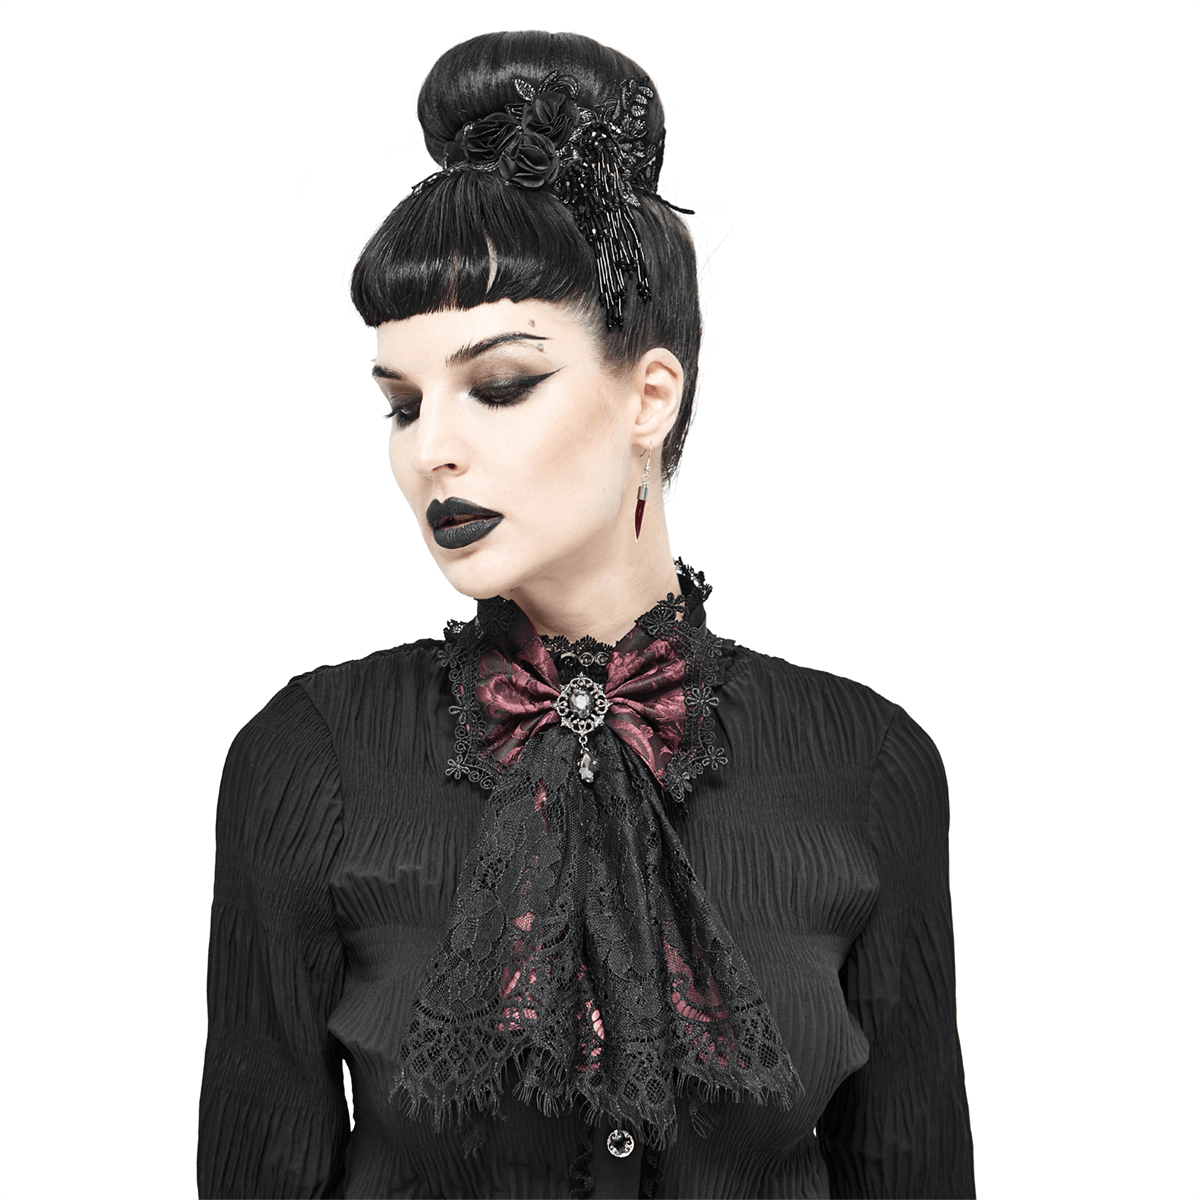 Altetnative Women's Lace Tie With Brooch / Vintage Steampunk Style Ladies Accessories - HARD'N'HEAVY